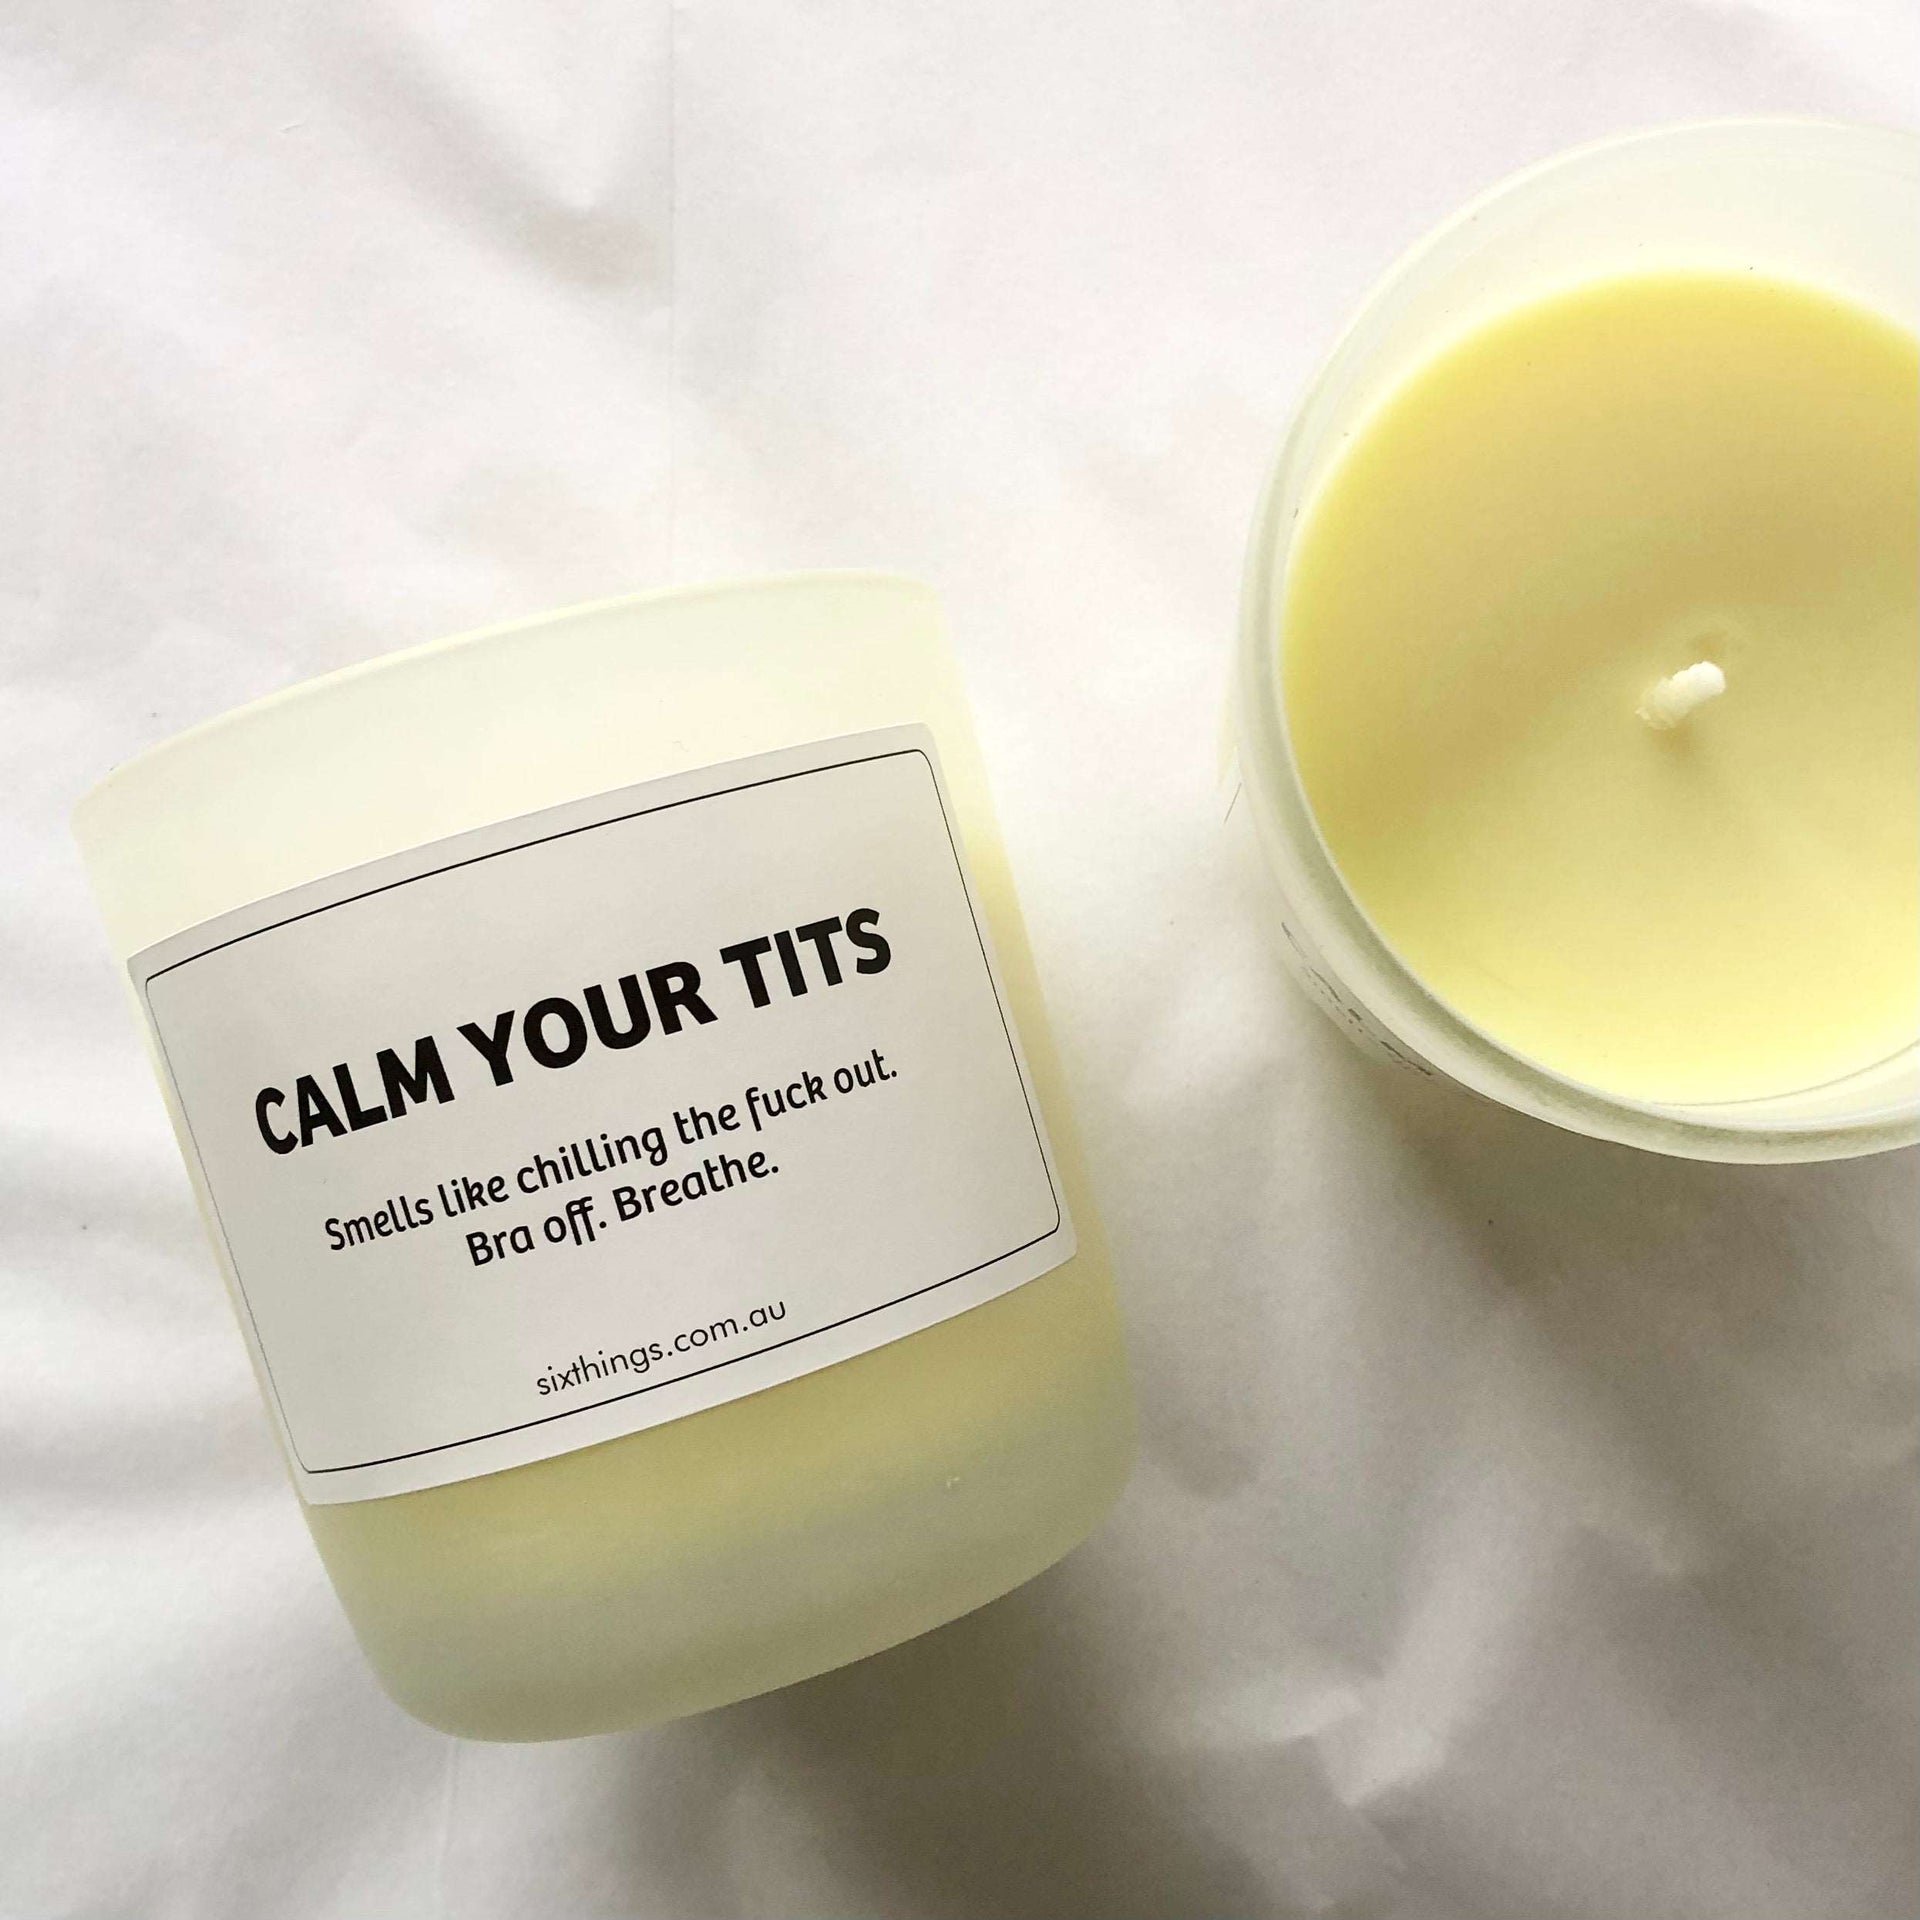 Candles - Chill the Fuck Out! Seriously, Calm Your Titties - gifts